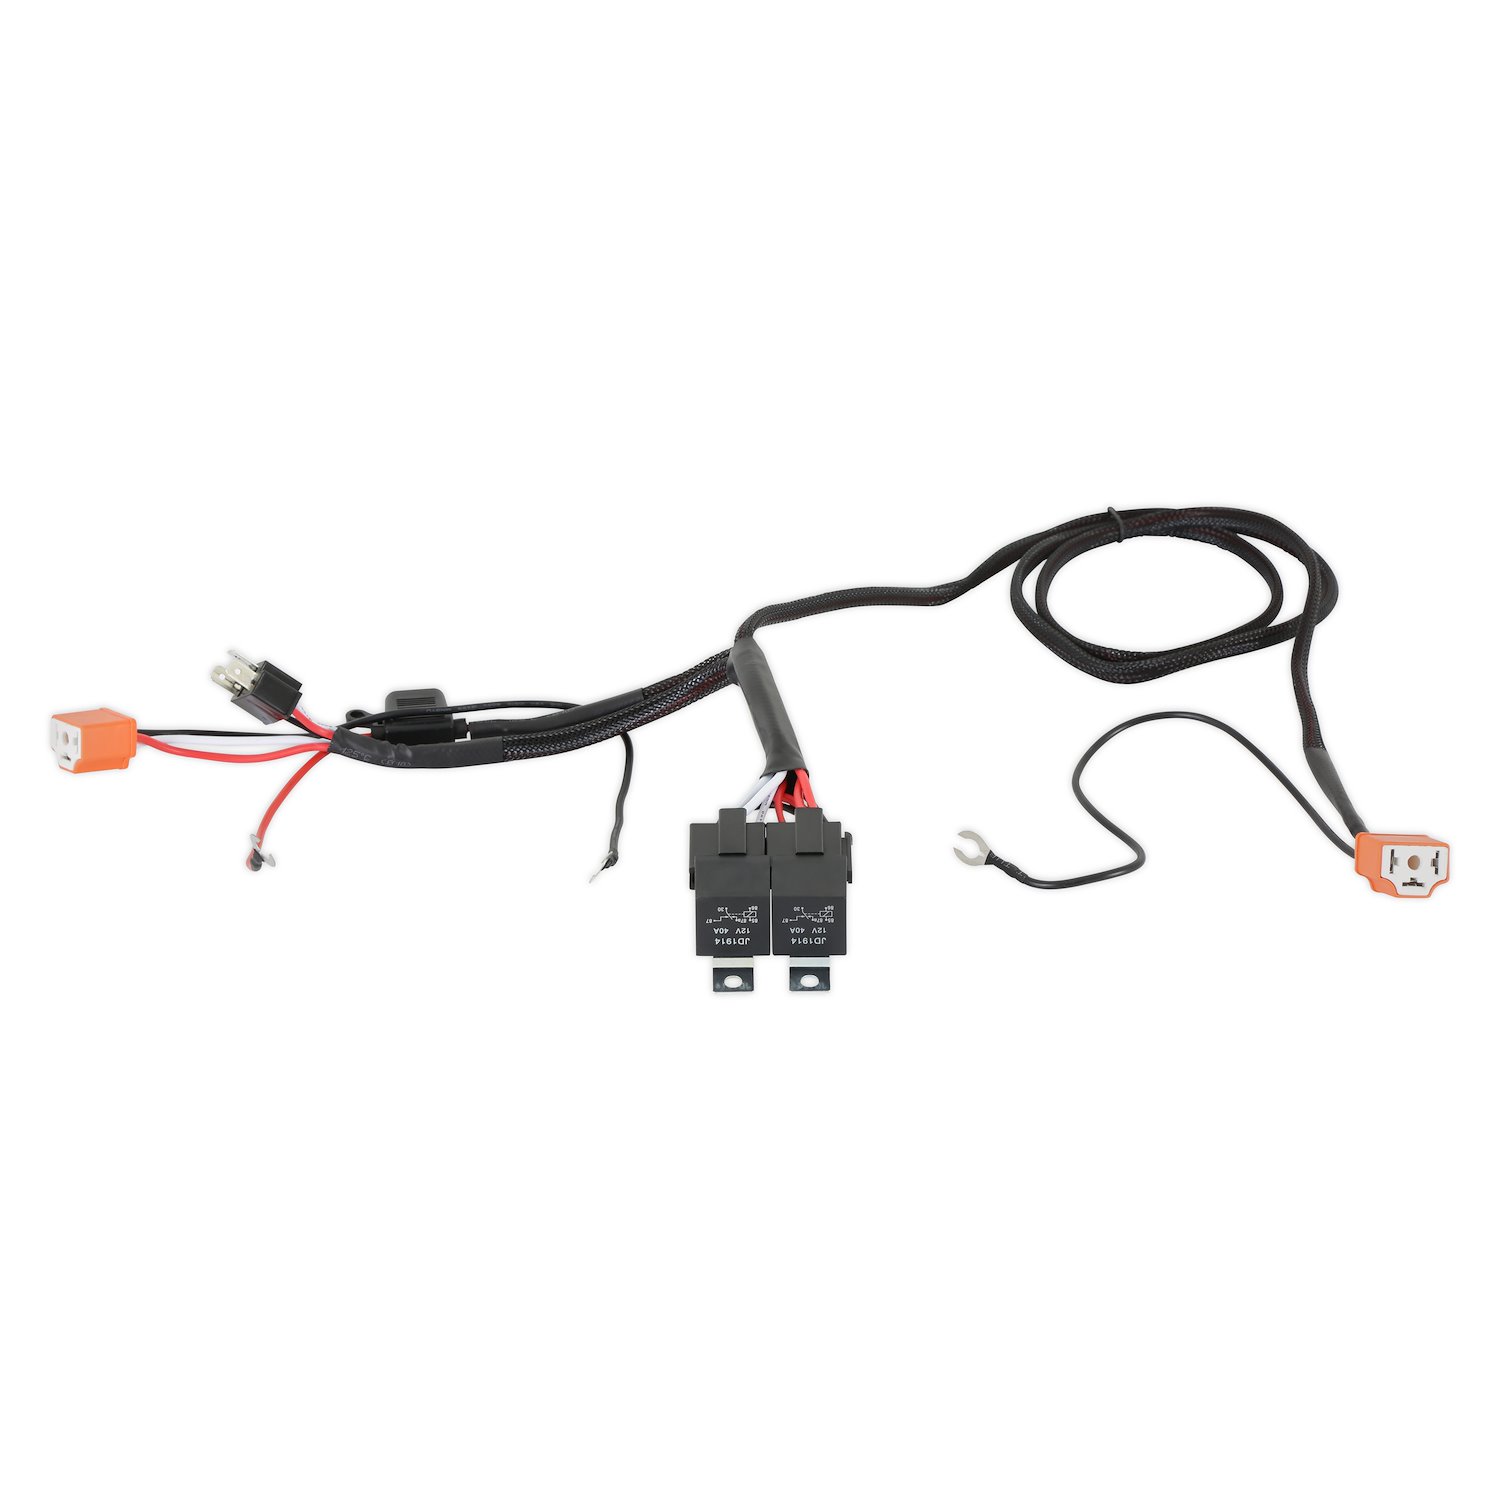 RetroBright Switched-Ground Headlight Harness for 1965-1985